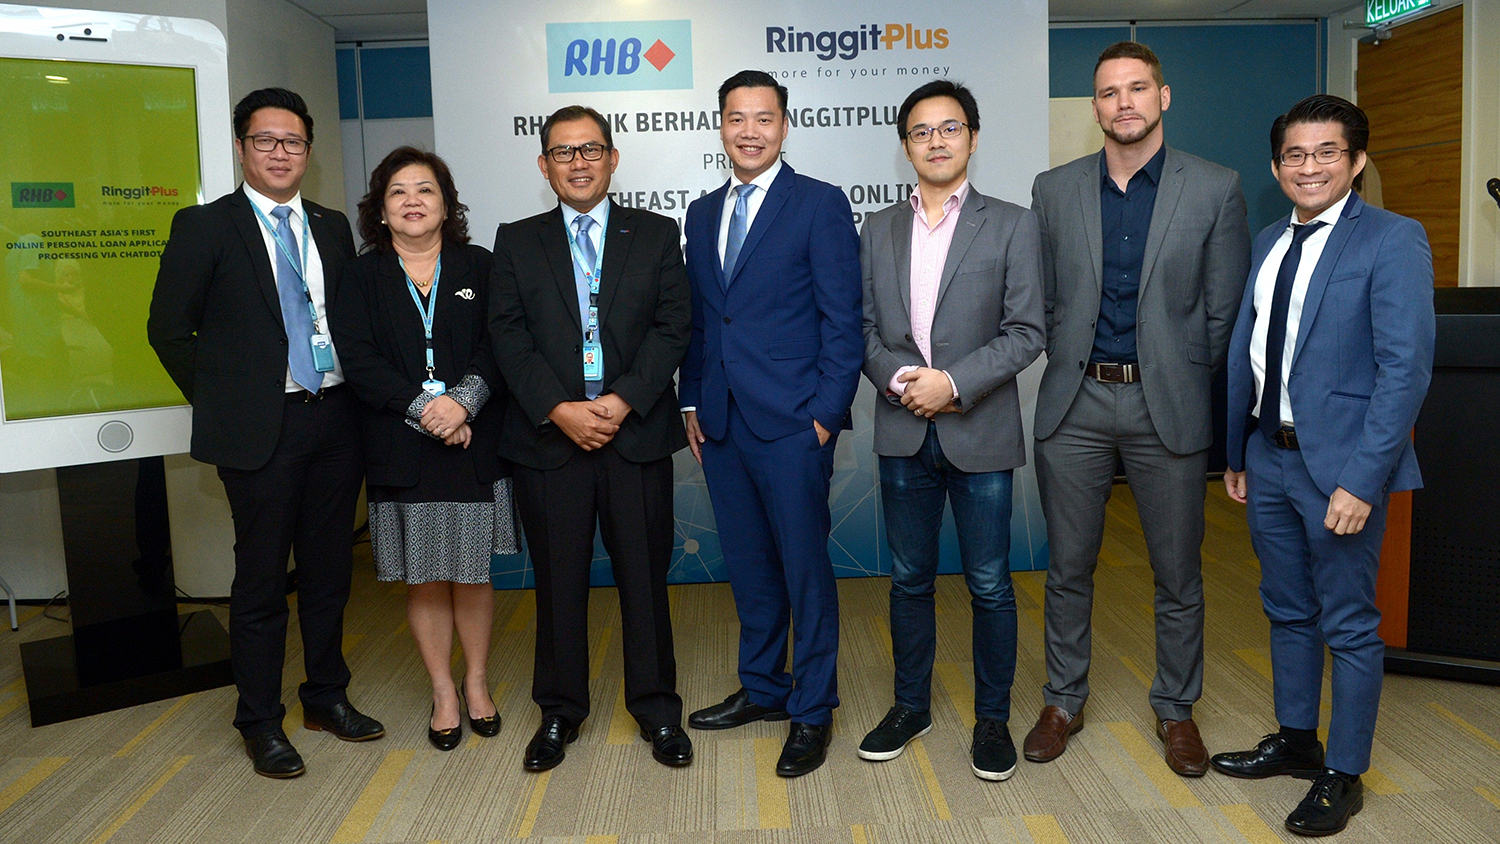 RHB, RinggitPlus introduce ChatBot to facilitate personal loan applications